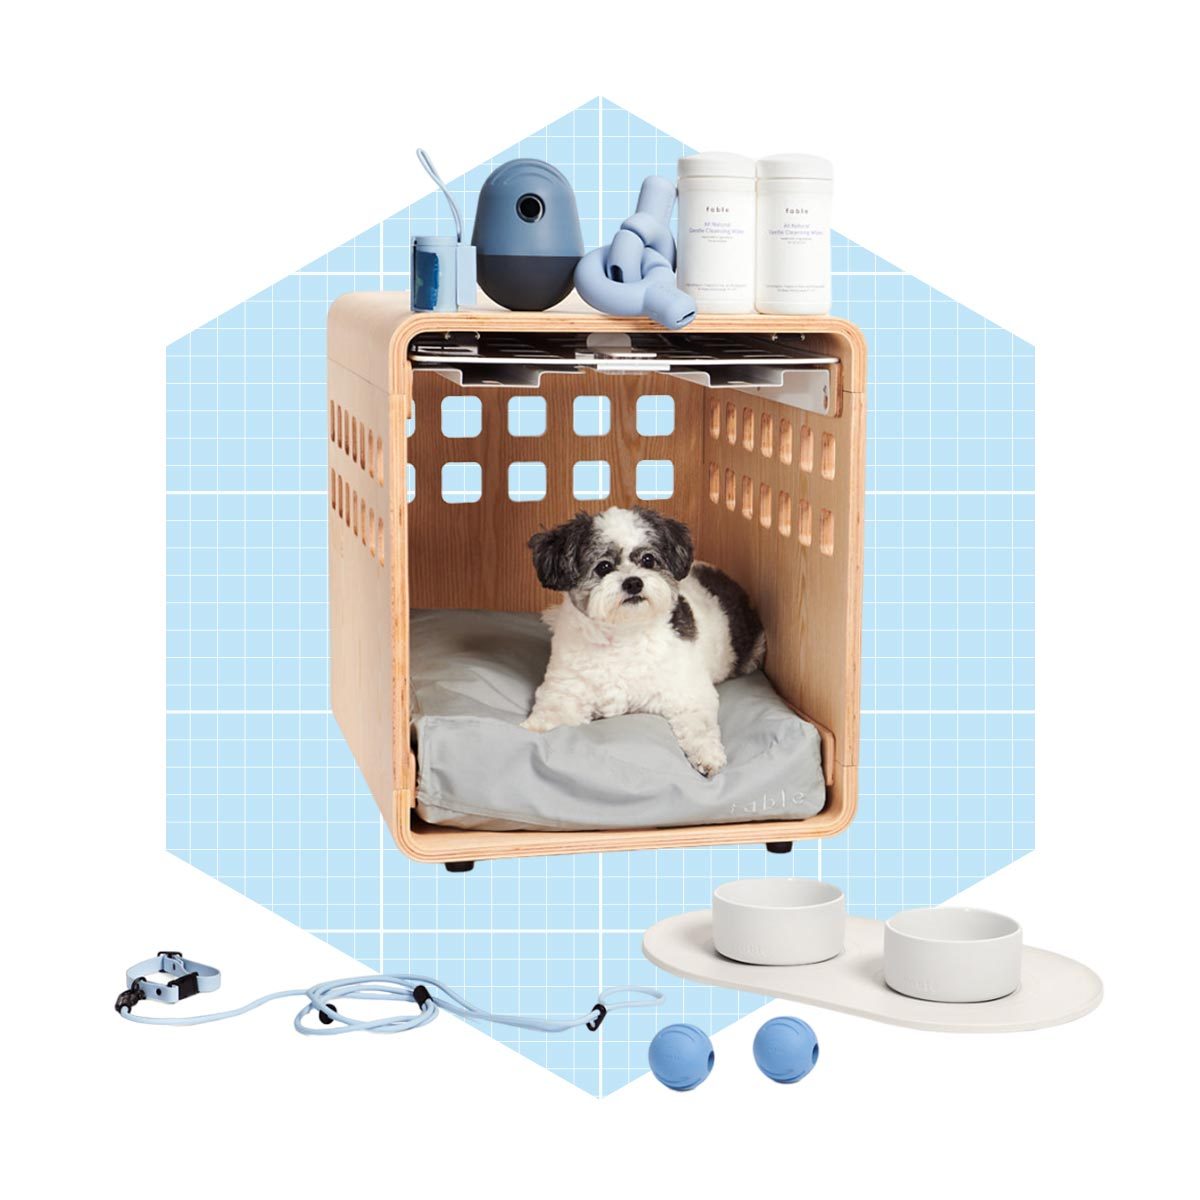 Fable  Innovative Pet Gear That Solves Real Problems